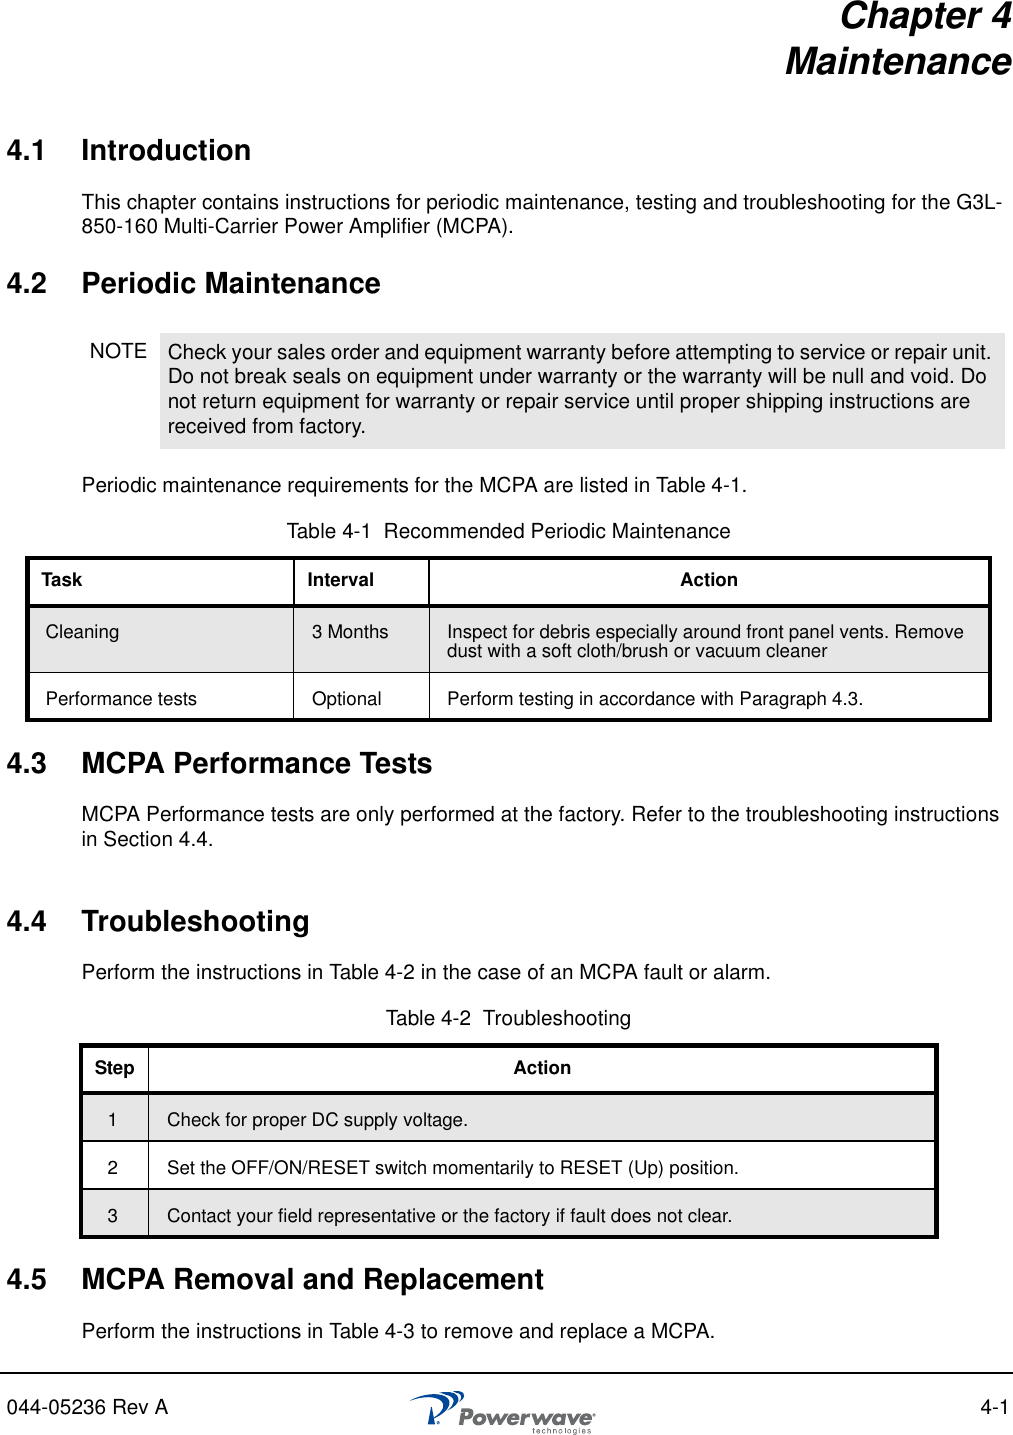 044-05236 Rev A 4-1Chapter 4Maintenance4.1 IntroductionThis chapter contains instructions for periodic maintenance, testing and troubleshooting for the G3L-850-160 Multi-Carrier Power Amplifier (MCPA).4.2 Periodic MaintenancePeriodic maintenance requirements for the MCPA are listed in Table 4-1.4.3 MCPA Performance TestsMCPA Performance tests are only performed at the factory. Refer to the troubleshooting instructions in Section 4.4.4.4 TroubleshootingPerform the instructions in Table 4-2 in the case of an MCPA fault or alarm.4.5 MCPA Removal and ReplacementPerform the instructions in Table 4-3 to remove and replace a MCPA.NOTE Check your sales order and equipment warranty before attempting to service or repair unit. Do not break seals on equipment under warranty or the warranty will be null and void. Do not return equipment for warranty or repair service until proper shipping instructions are received from factory.Table 4-1  Recommended Periodic MaintenanceTask Interval ActionCleaning  3 Months Inspect for debris especially around front panel vents. Remove dust with a soft cloth/brush or vacuum cleanerPerformance tests Optional Perform testing in accordance with Paragraph 4.3.Table 4-2  TroubleshootingStep Action1Check for proper DC supply voltage.2 Set the OFF/ON/RESET switch momentarily to RESET (Up) position.3Contact your field representative or the factory if fault does not clear.